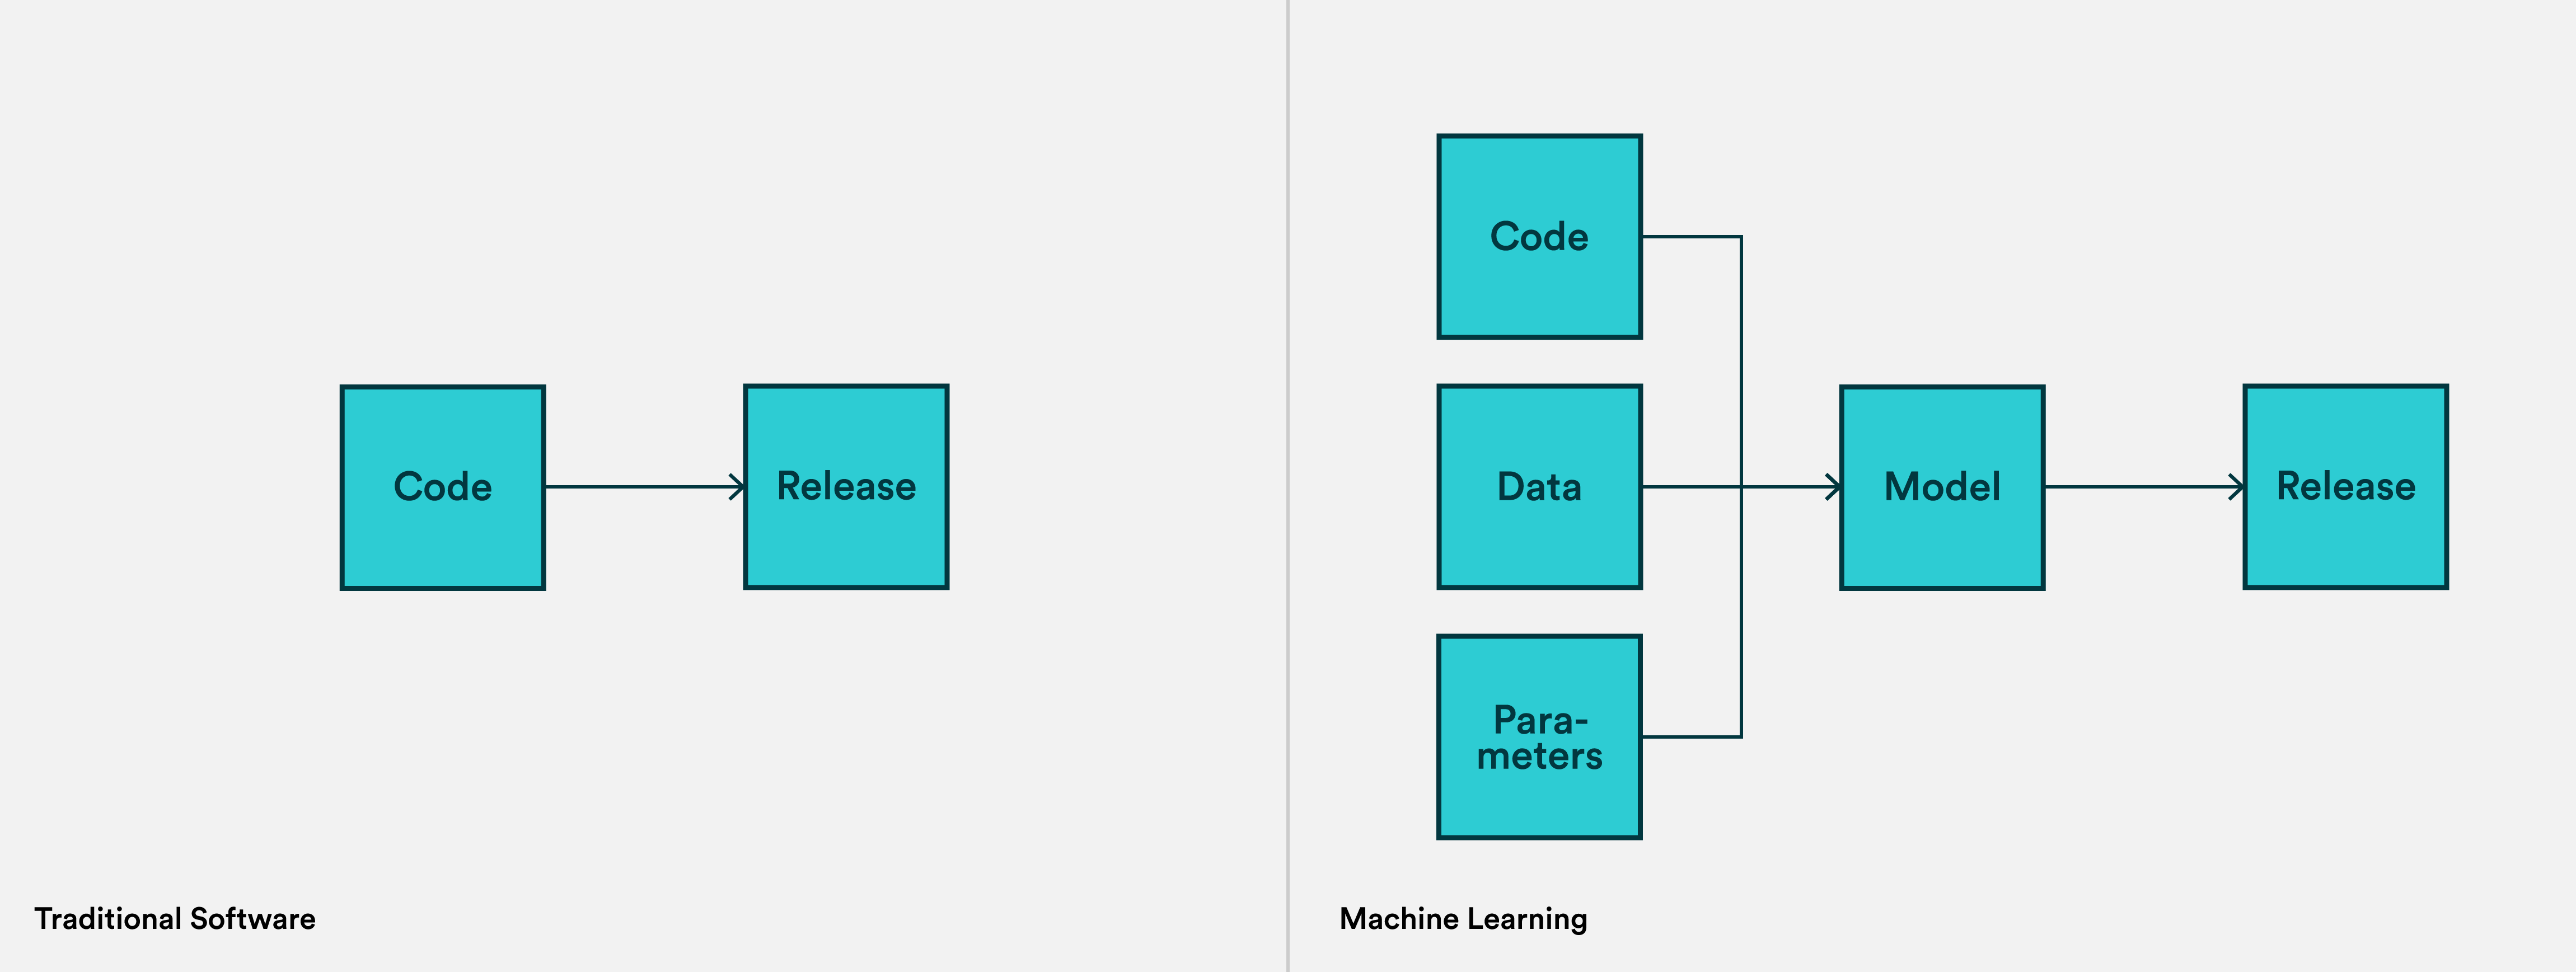 How software and machine learning releases are different?